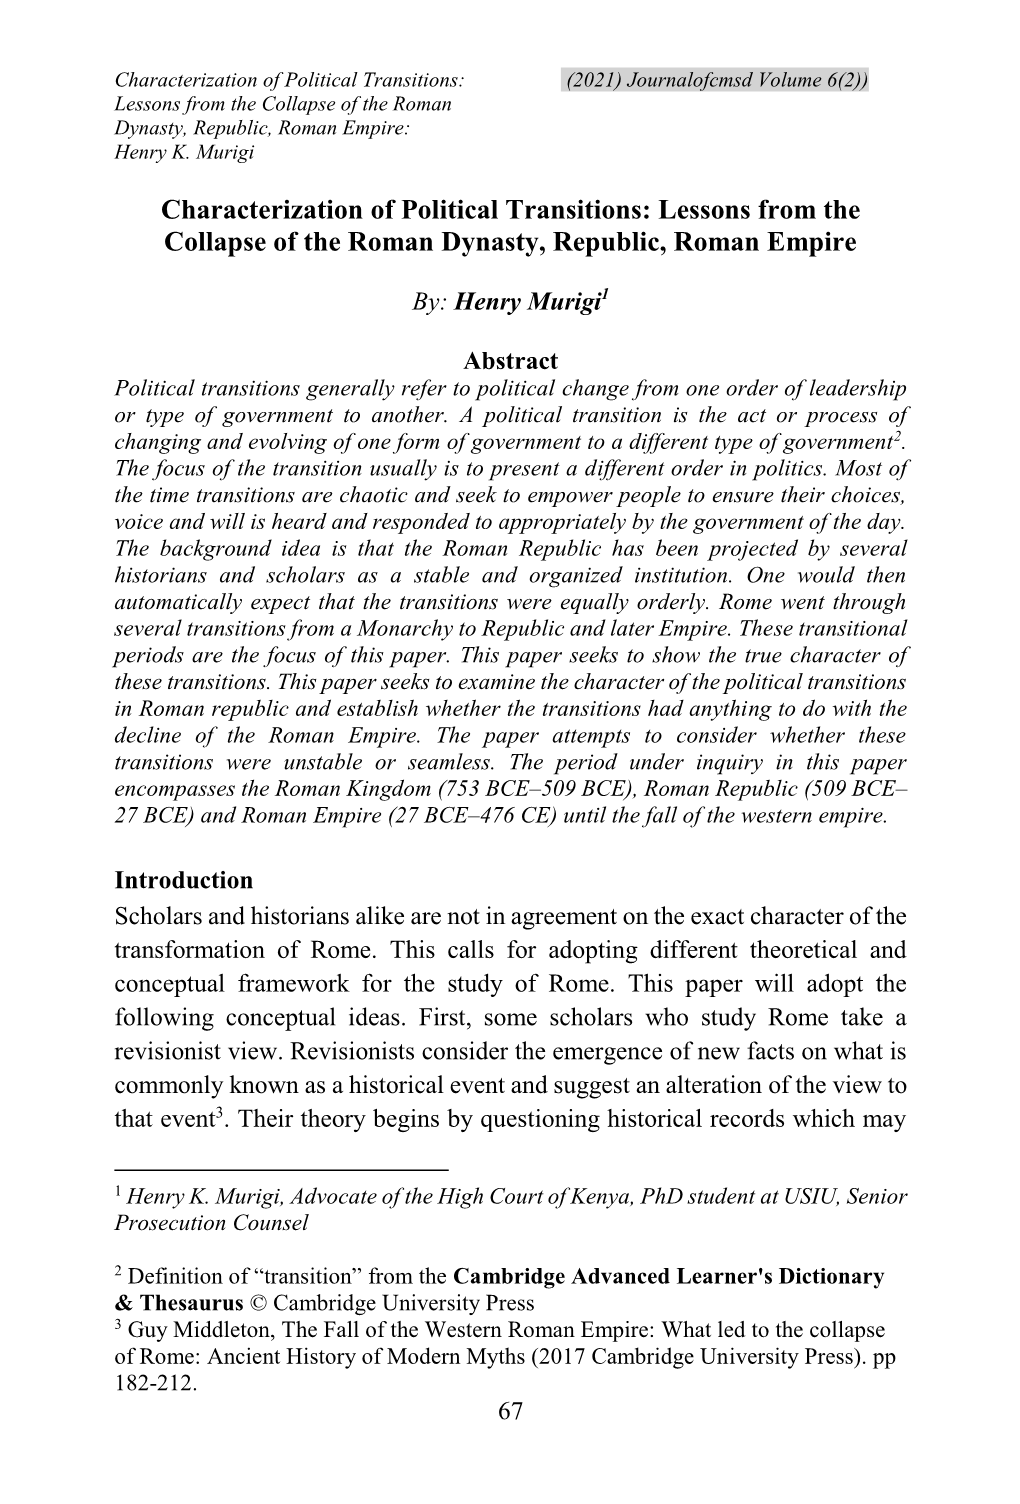 Characterization of Political Transitions: (2021) Journalofcmsd Volume 6(2)) Lessons from the Collapse of the Roman Dynasty, Republic, Roman Empire: Henry K